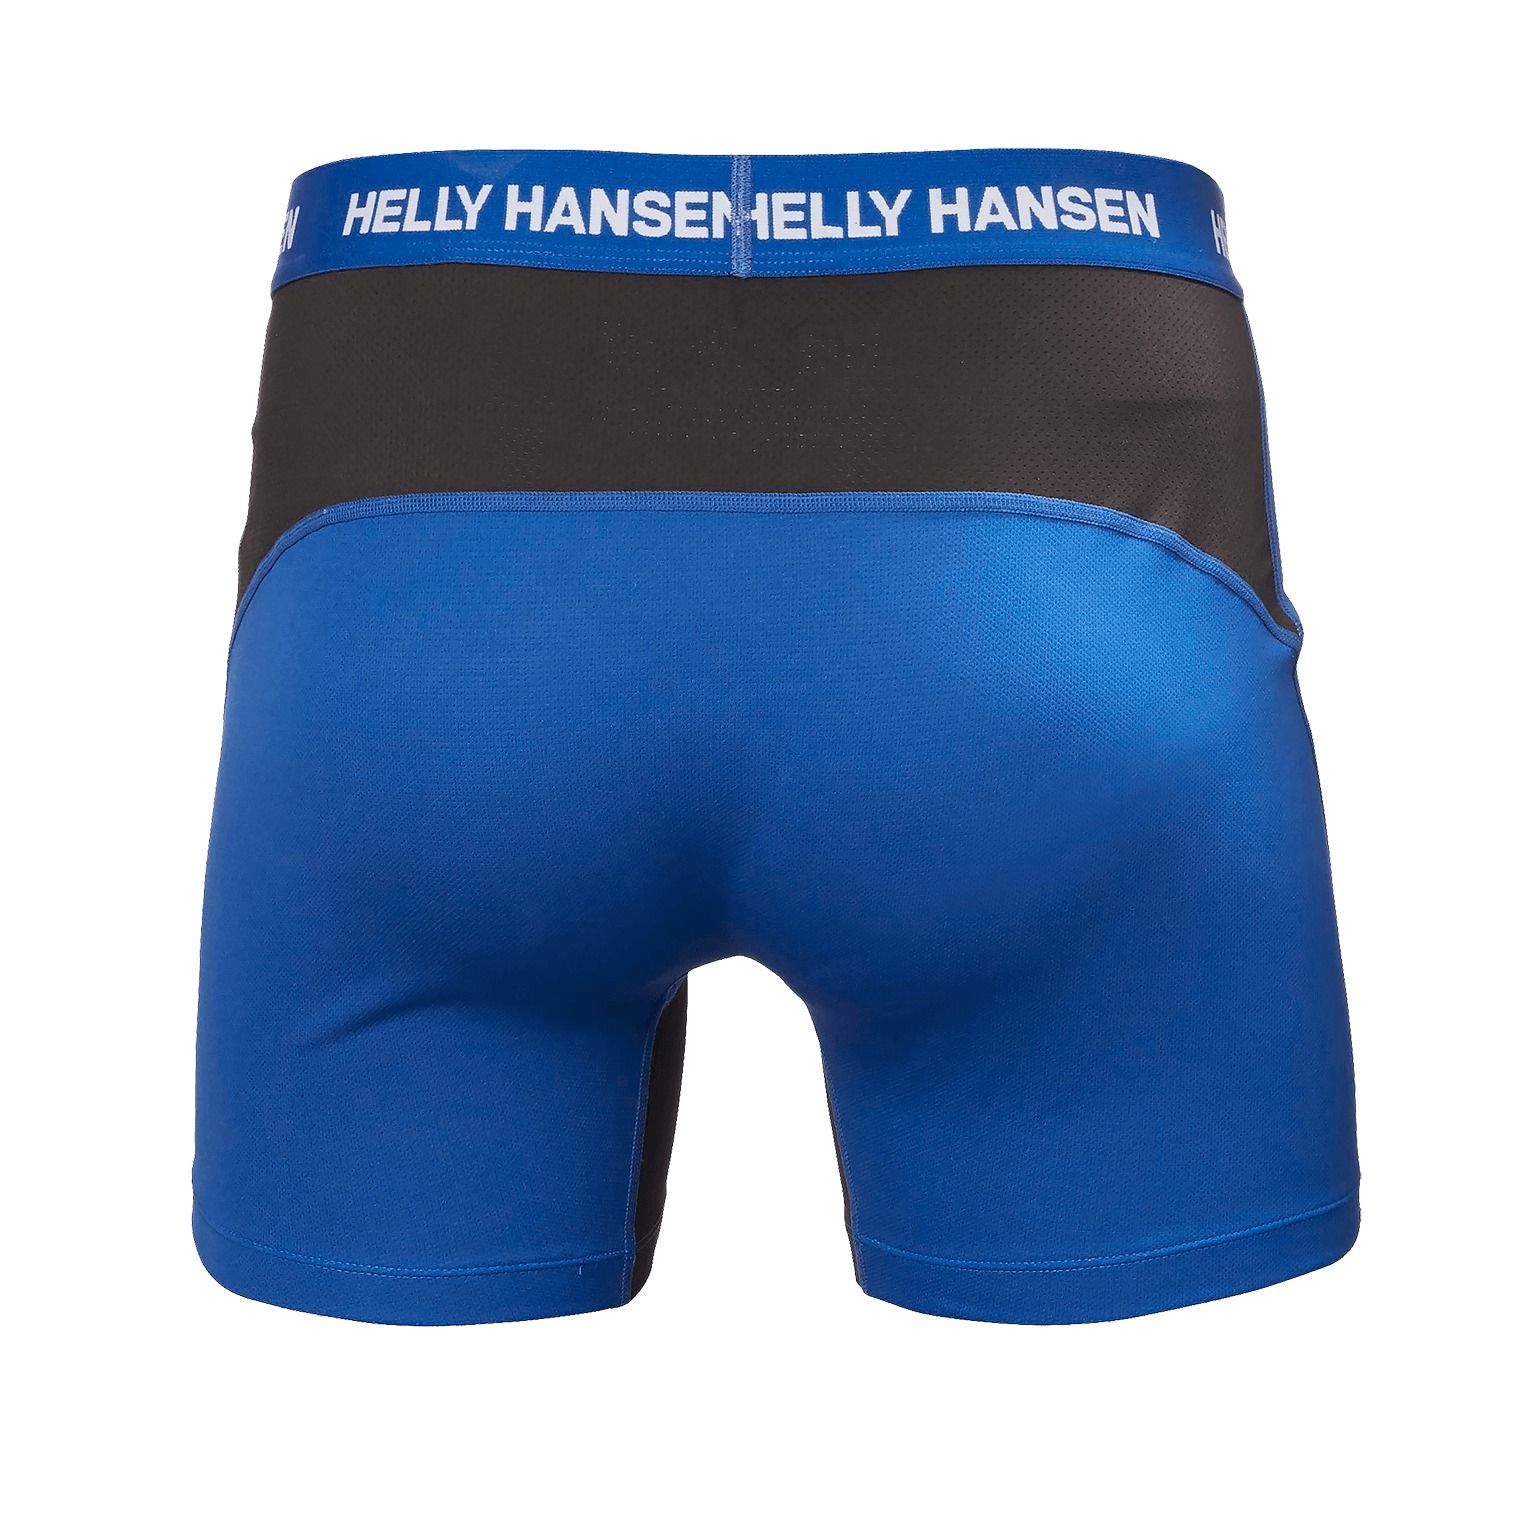 Helly Hansen xcool boxer review by snowguide - back